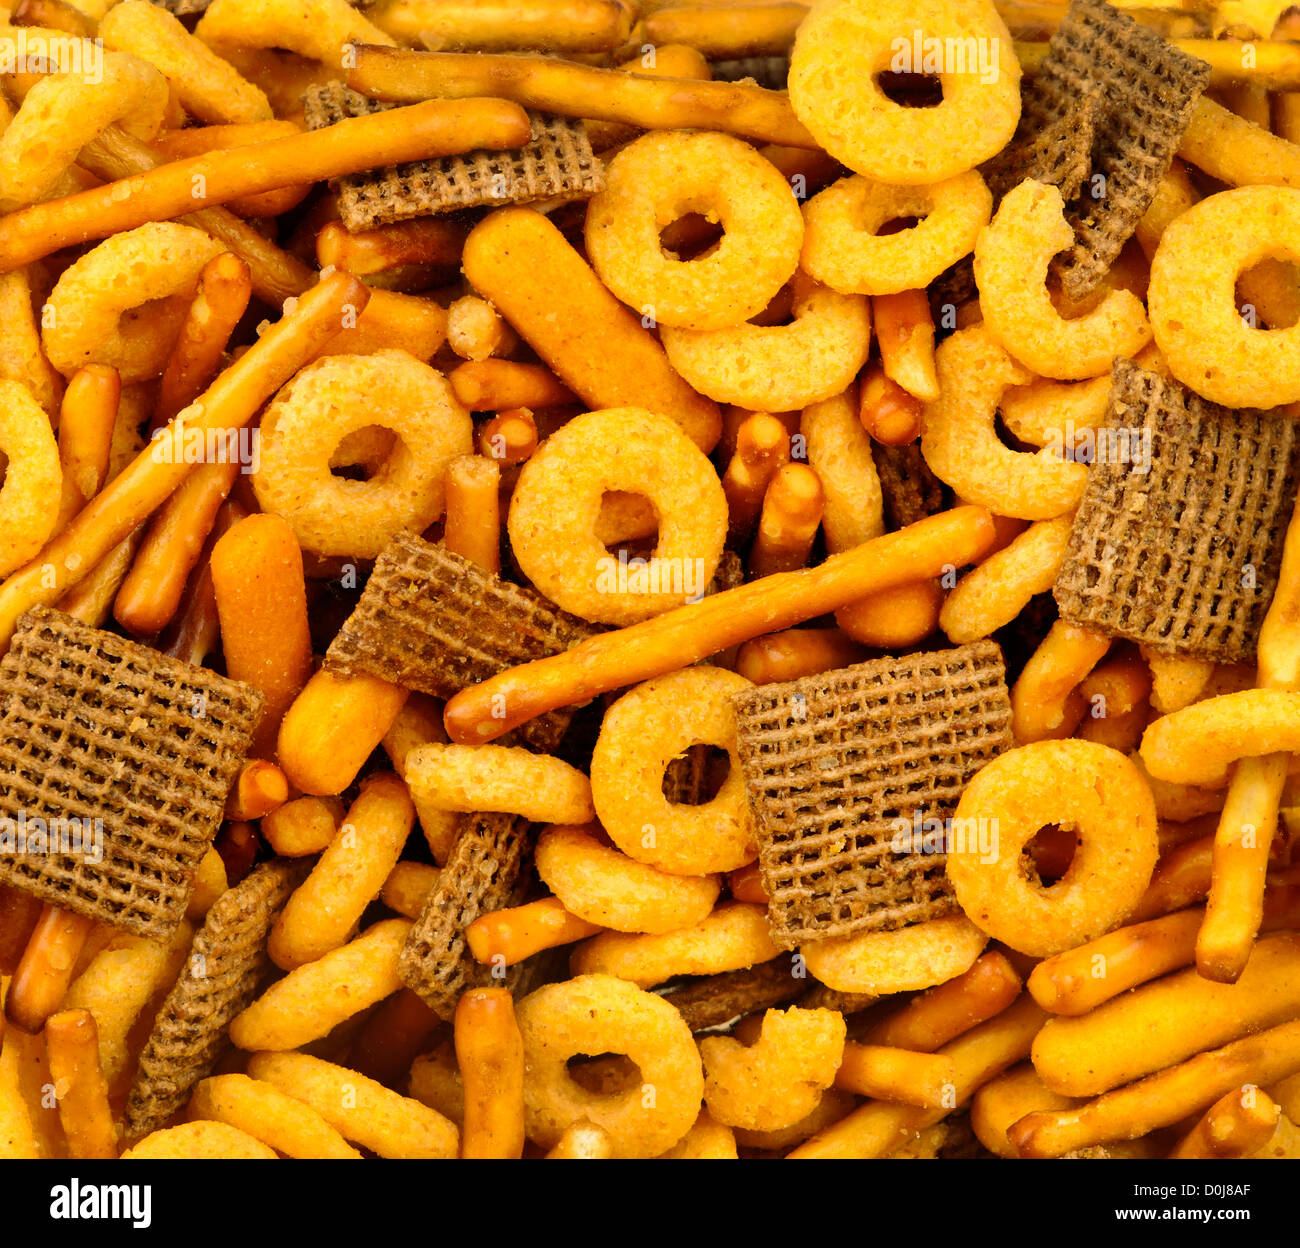 Closeup background of various snacks and junk food Stock Photo